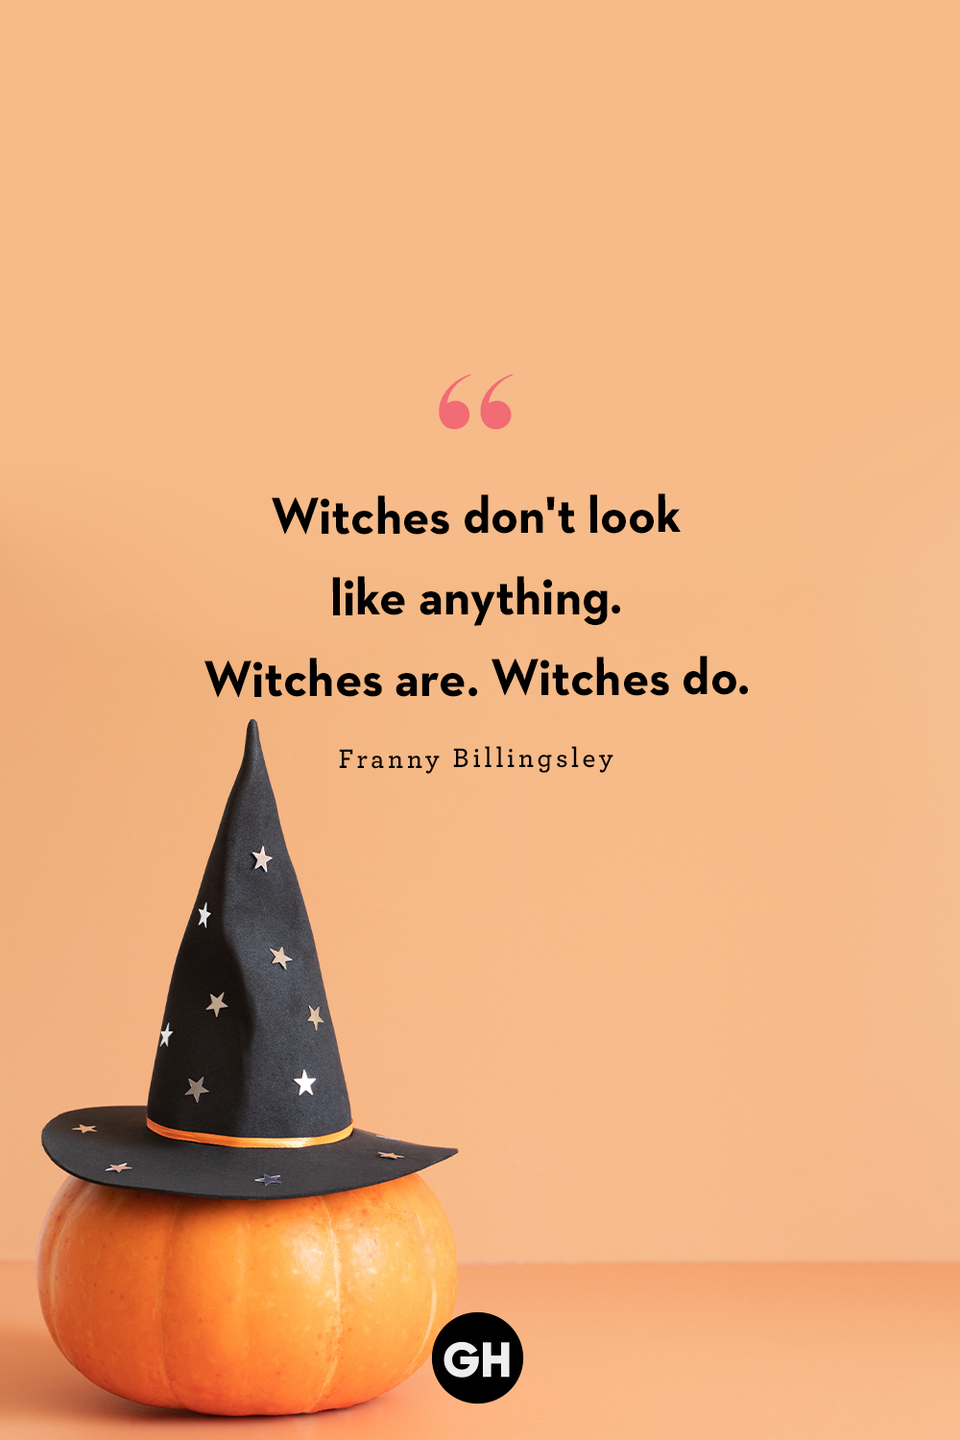 <p>"Witches don't look like anything. Witches are. Witches do."</p>